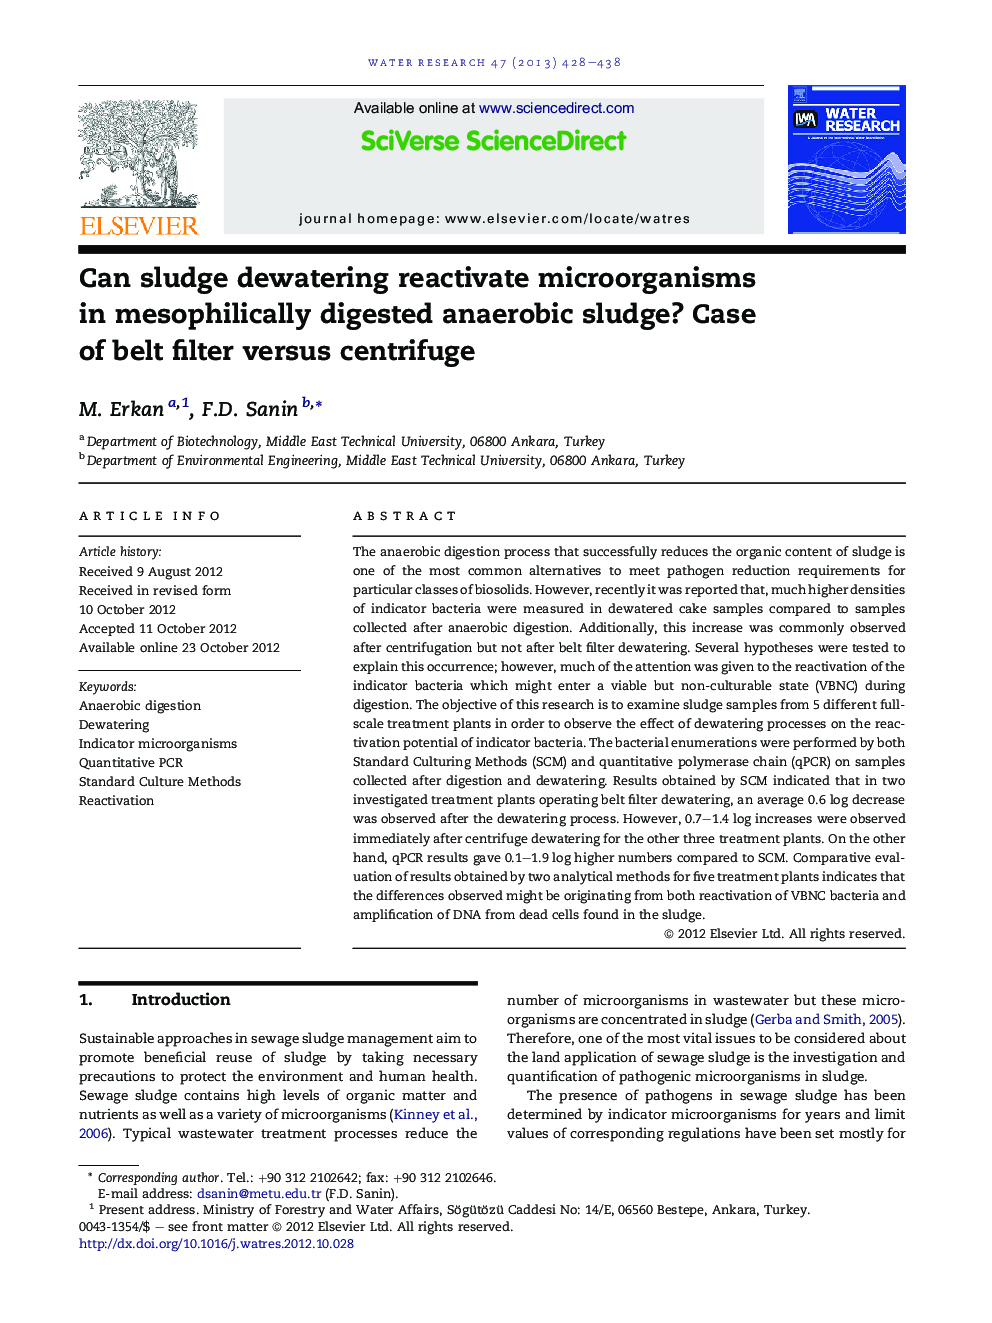 Can sludge dewatering reactivate microorganisms in mesophilically digested anaerobic sludge? Case of belt filter versus centrifuge